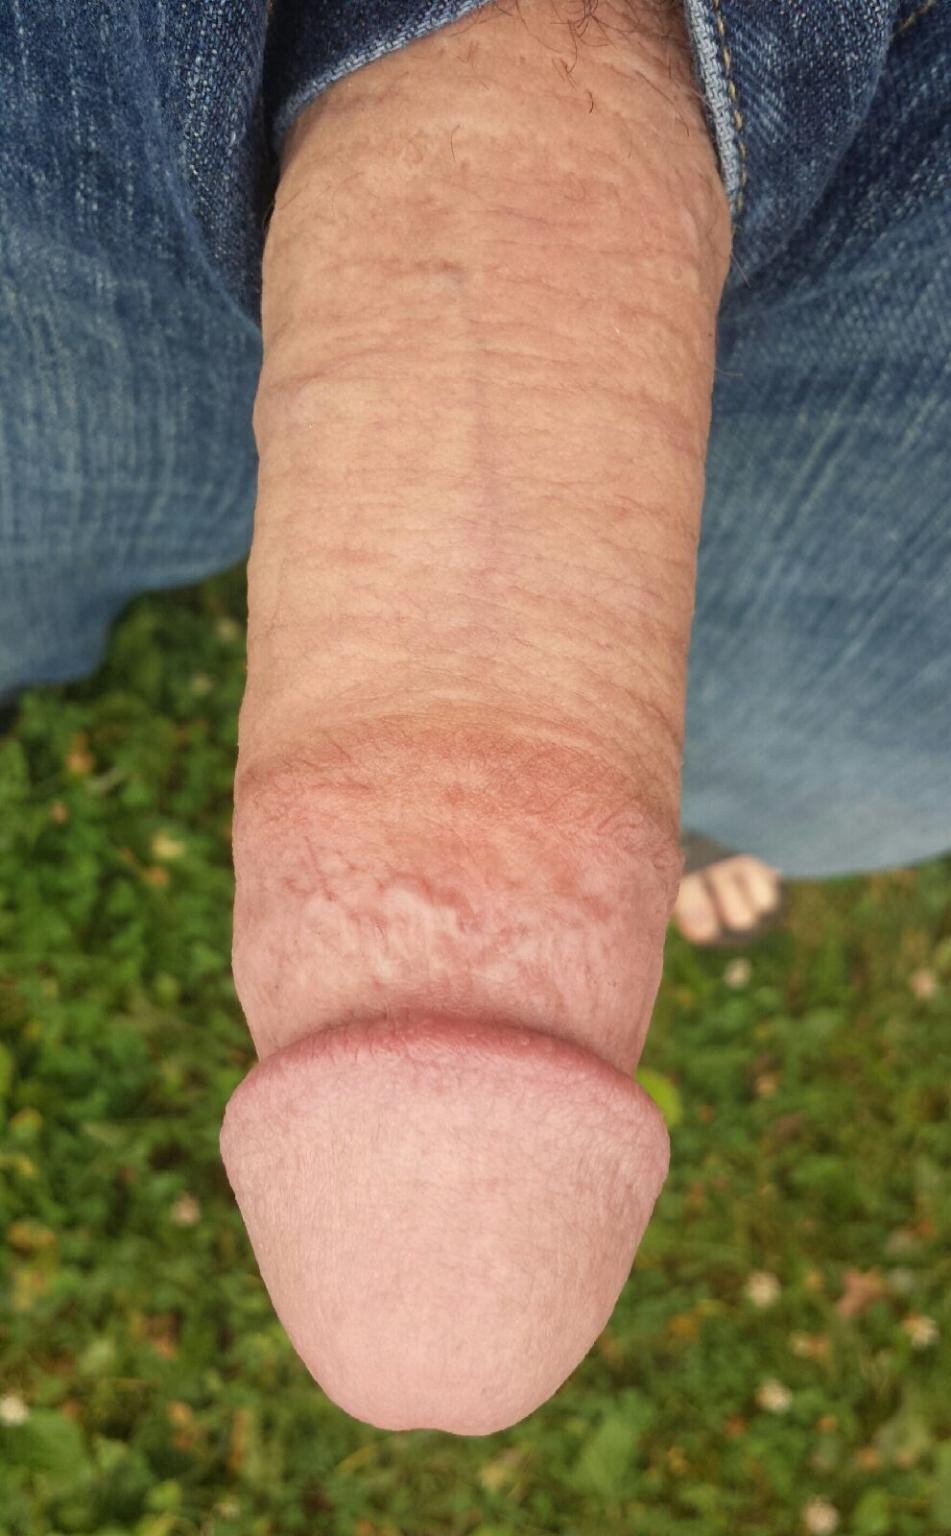 Photo by jodawg69joe with the username @jodawg69joe,  September 17, 2019 at 6:49 PM. The post is about the topic Cocks to admire and the text says 'You can admire mine if you want!!'